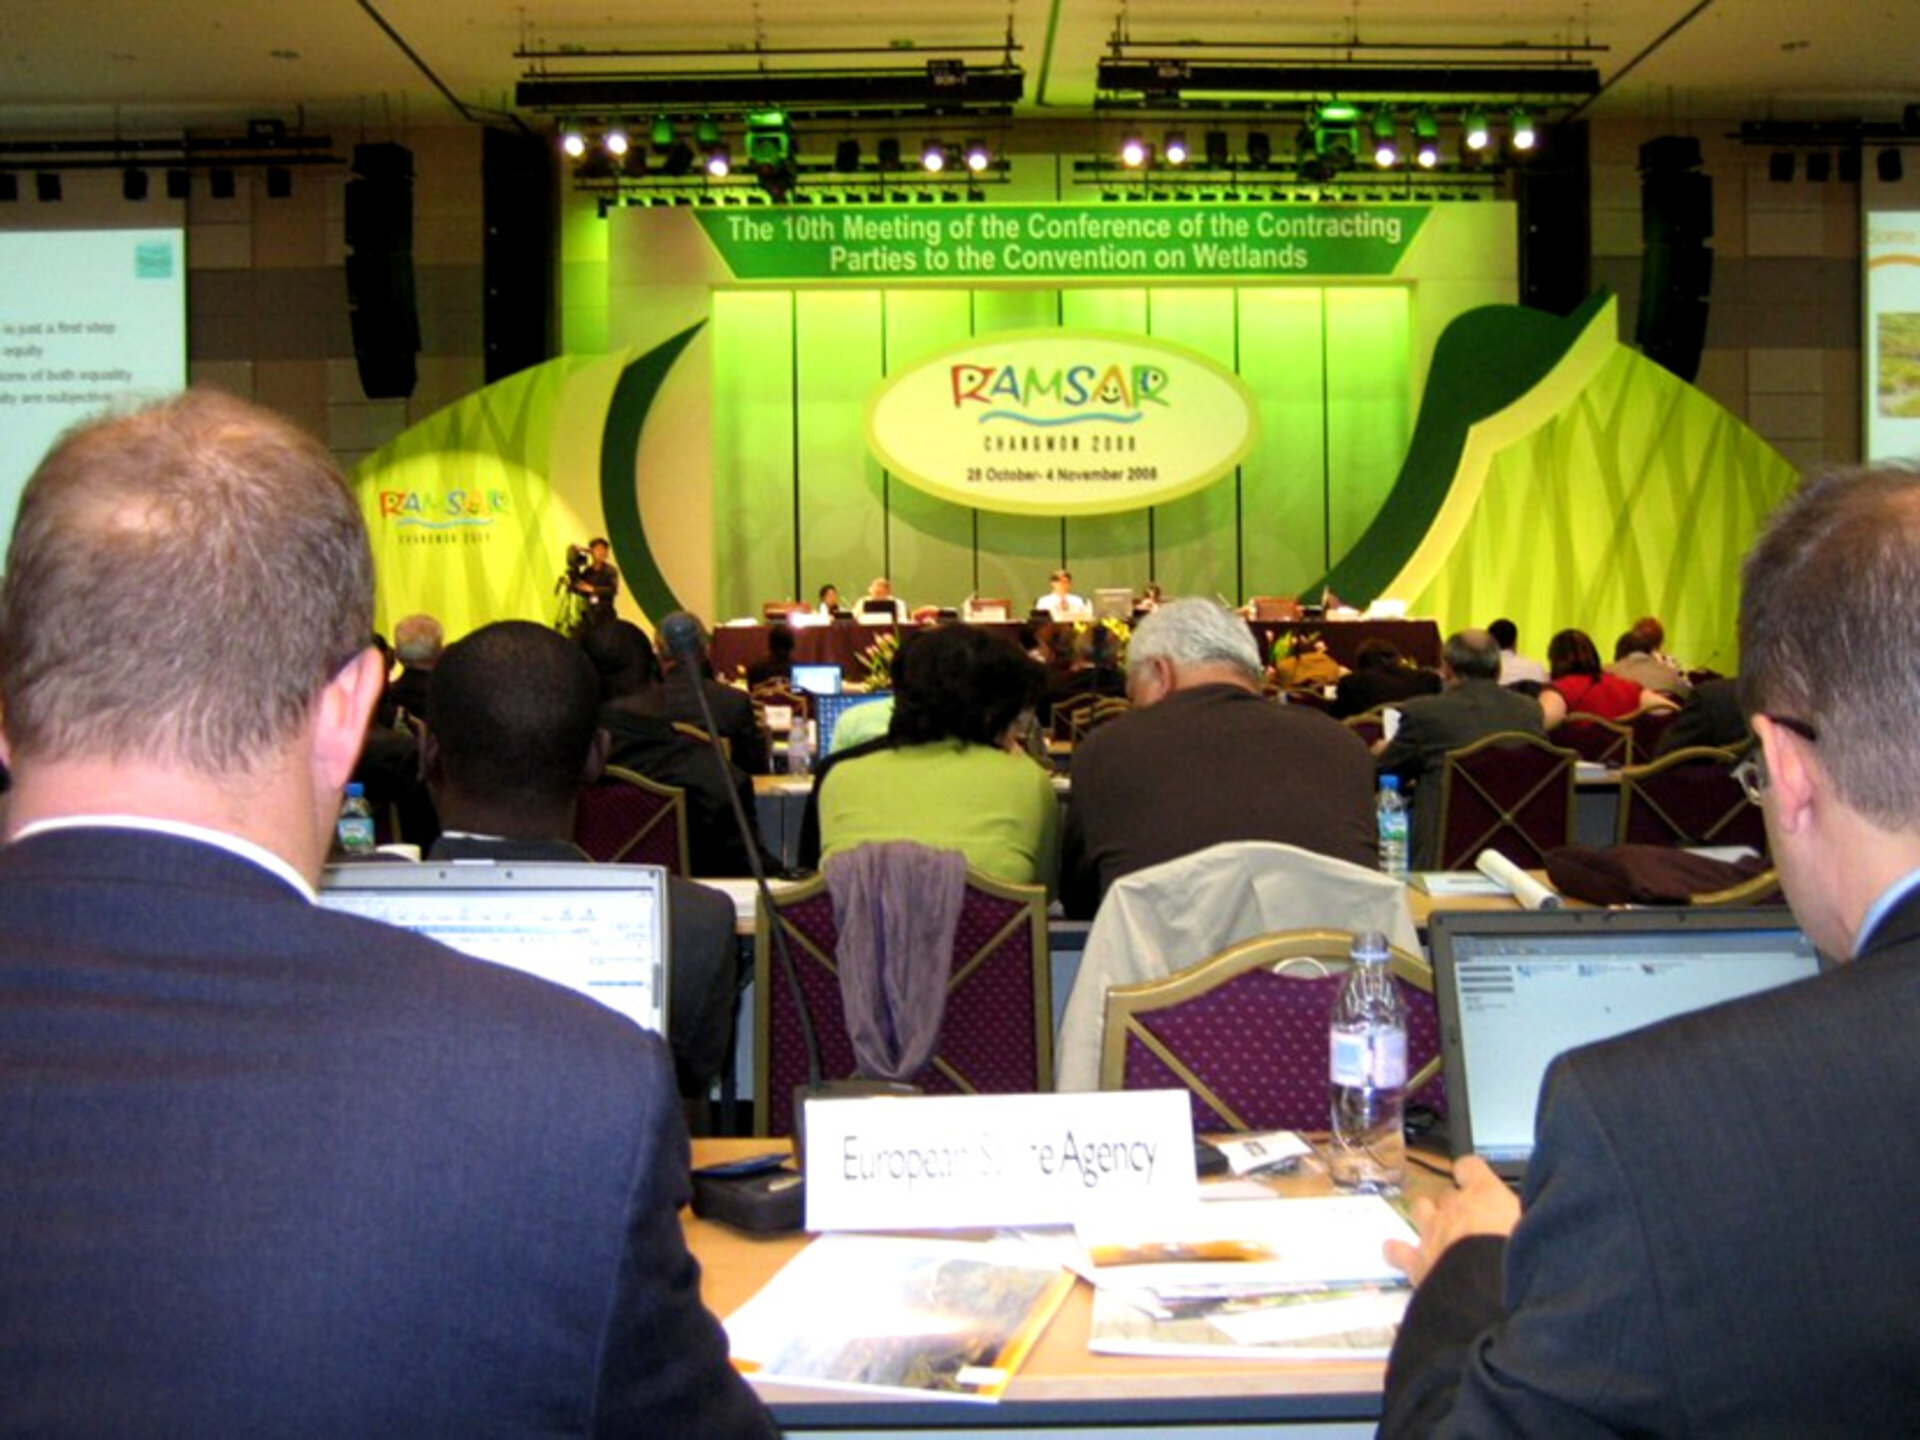 ESA attends the plenary of the Ramsar COP 10